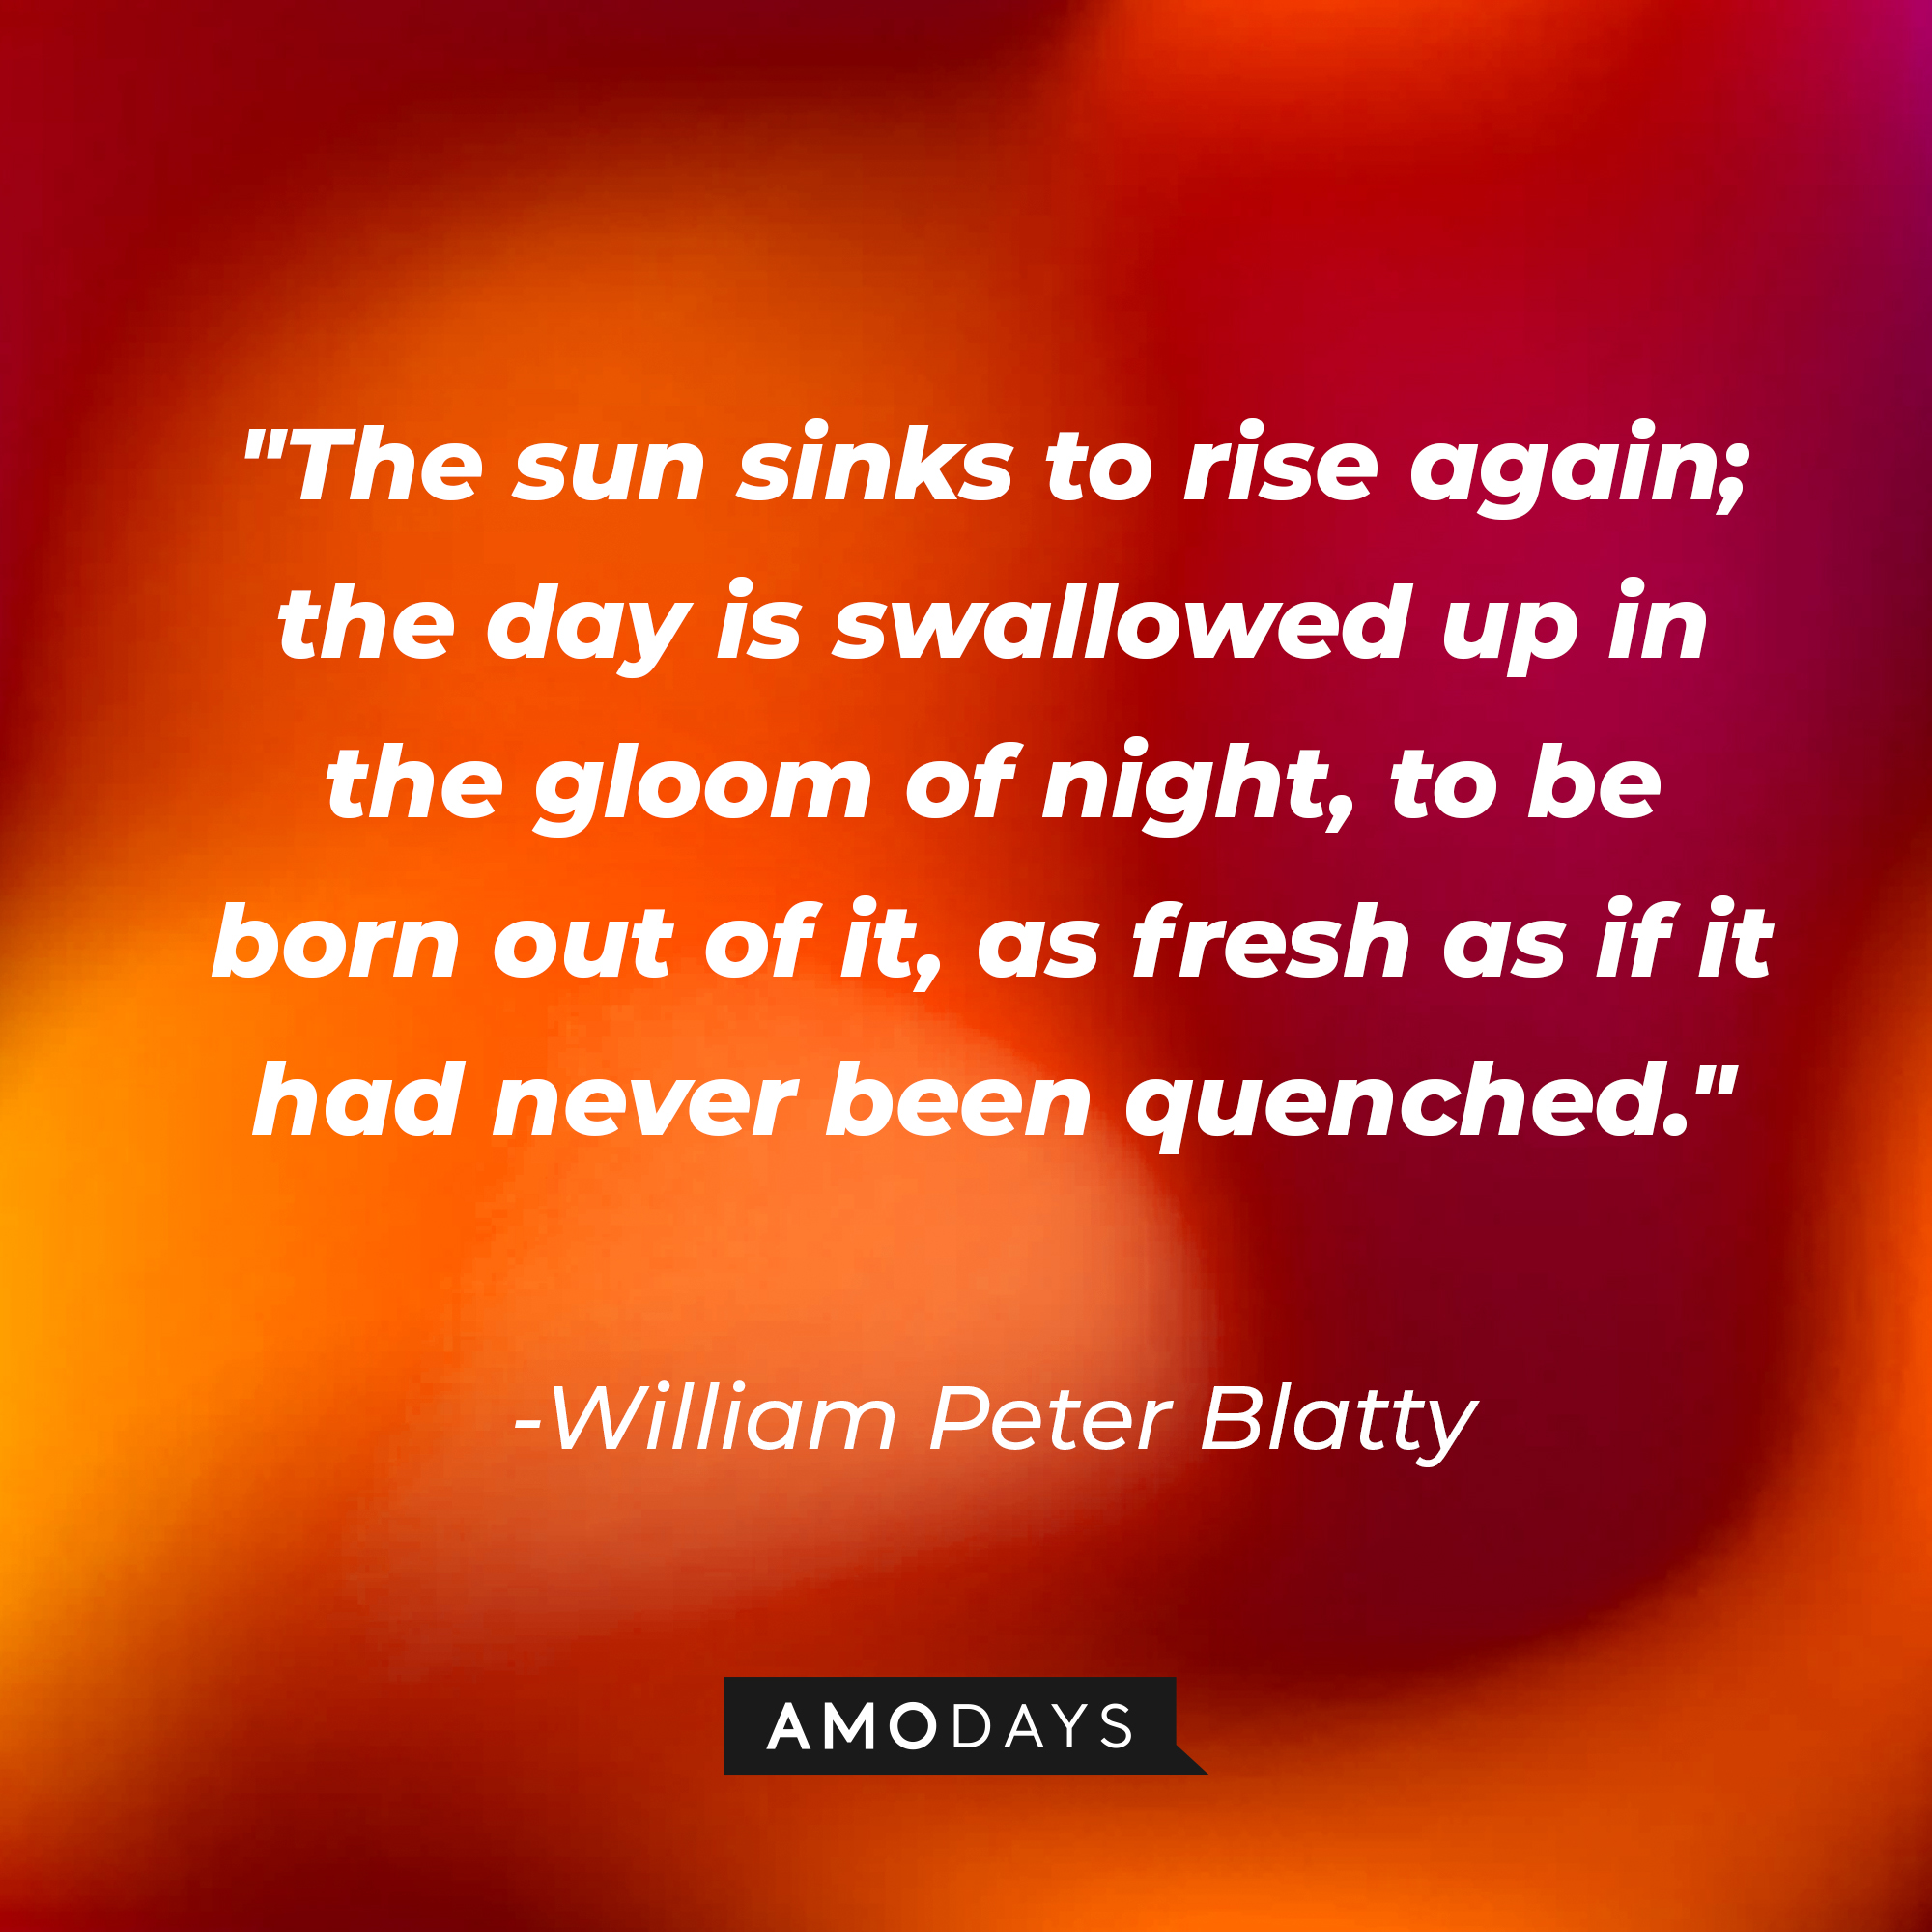 William Peter Blatty's quote: "The sun sinks to rise again; the day is swallowed up in the gloom of night, to be born out of it, as fresh as if it had never been quenched." | Source: AmoDays